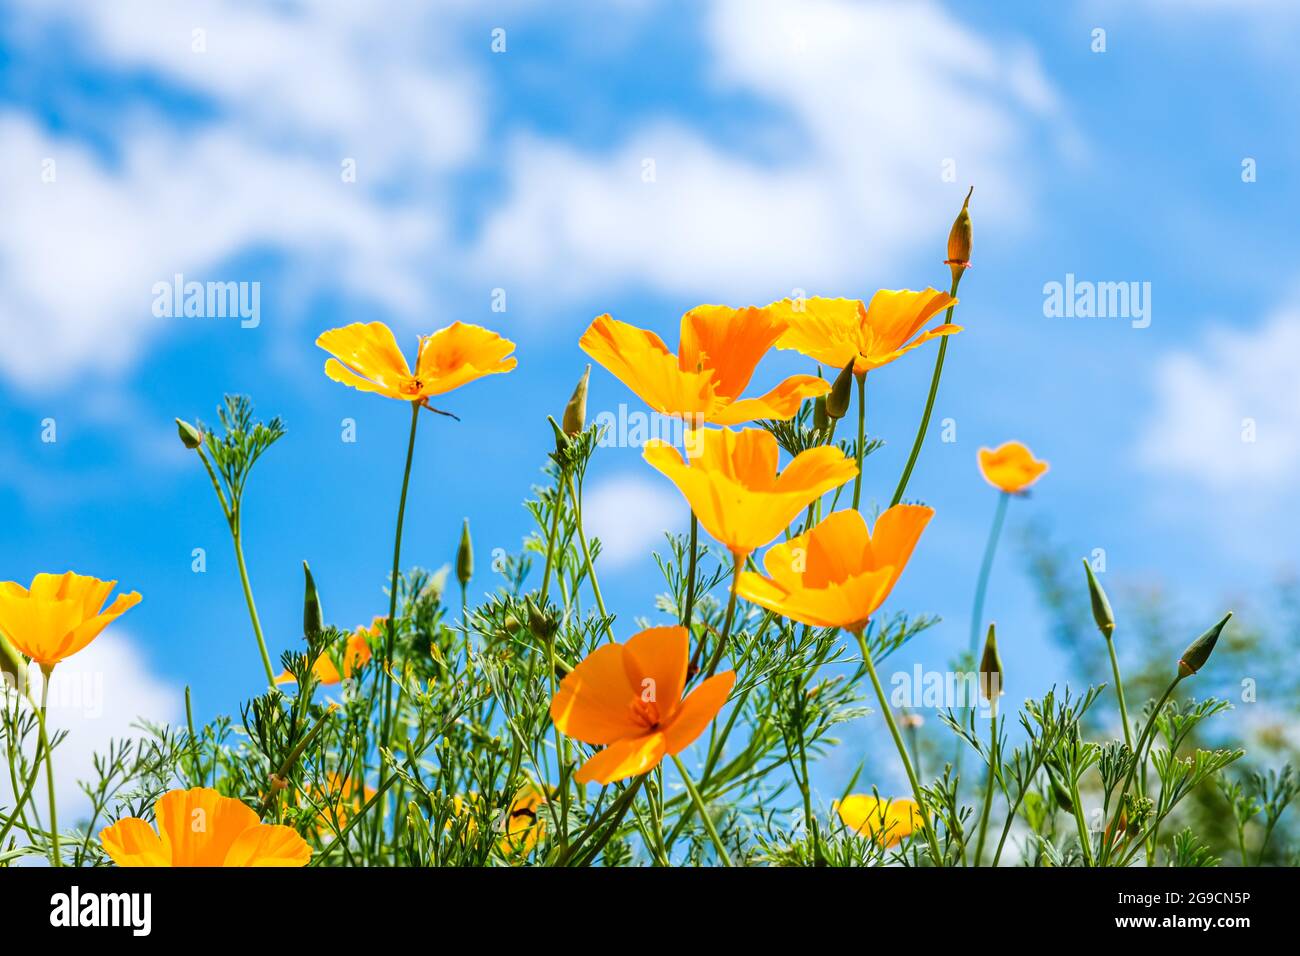 Frog's-eye view of blooming California poppies against a blue sky Stock Photo